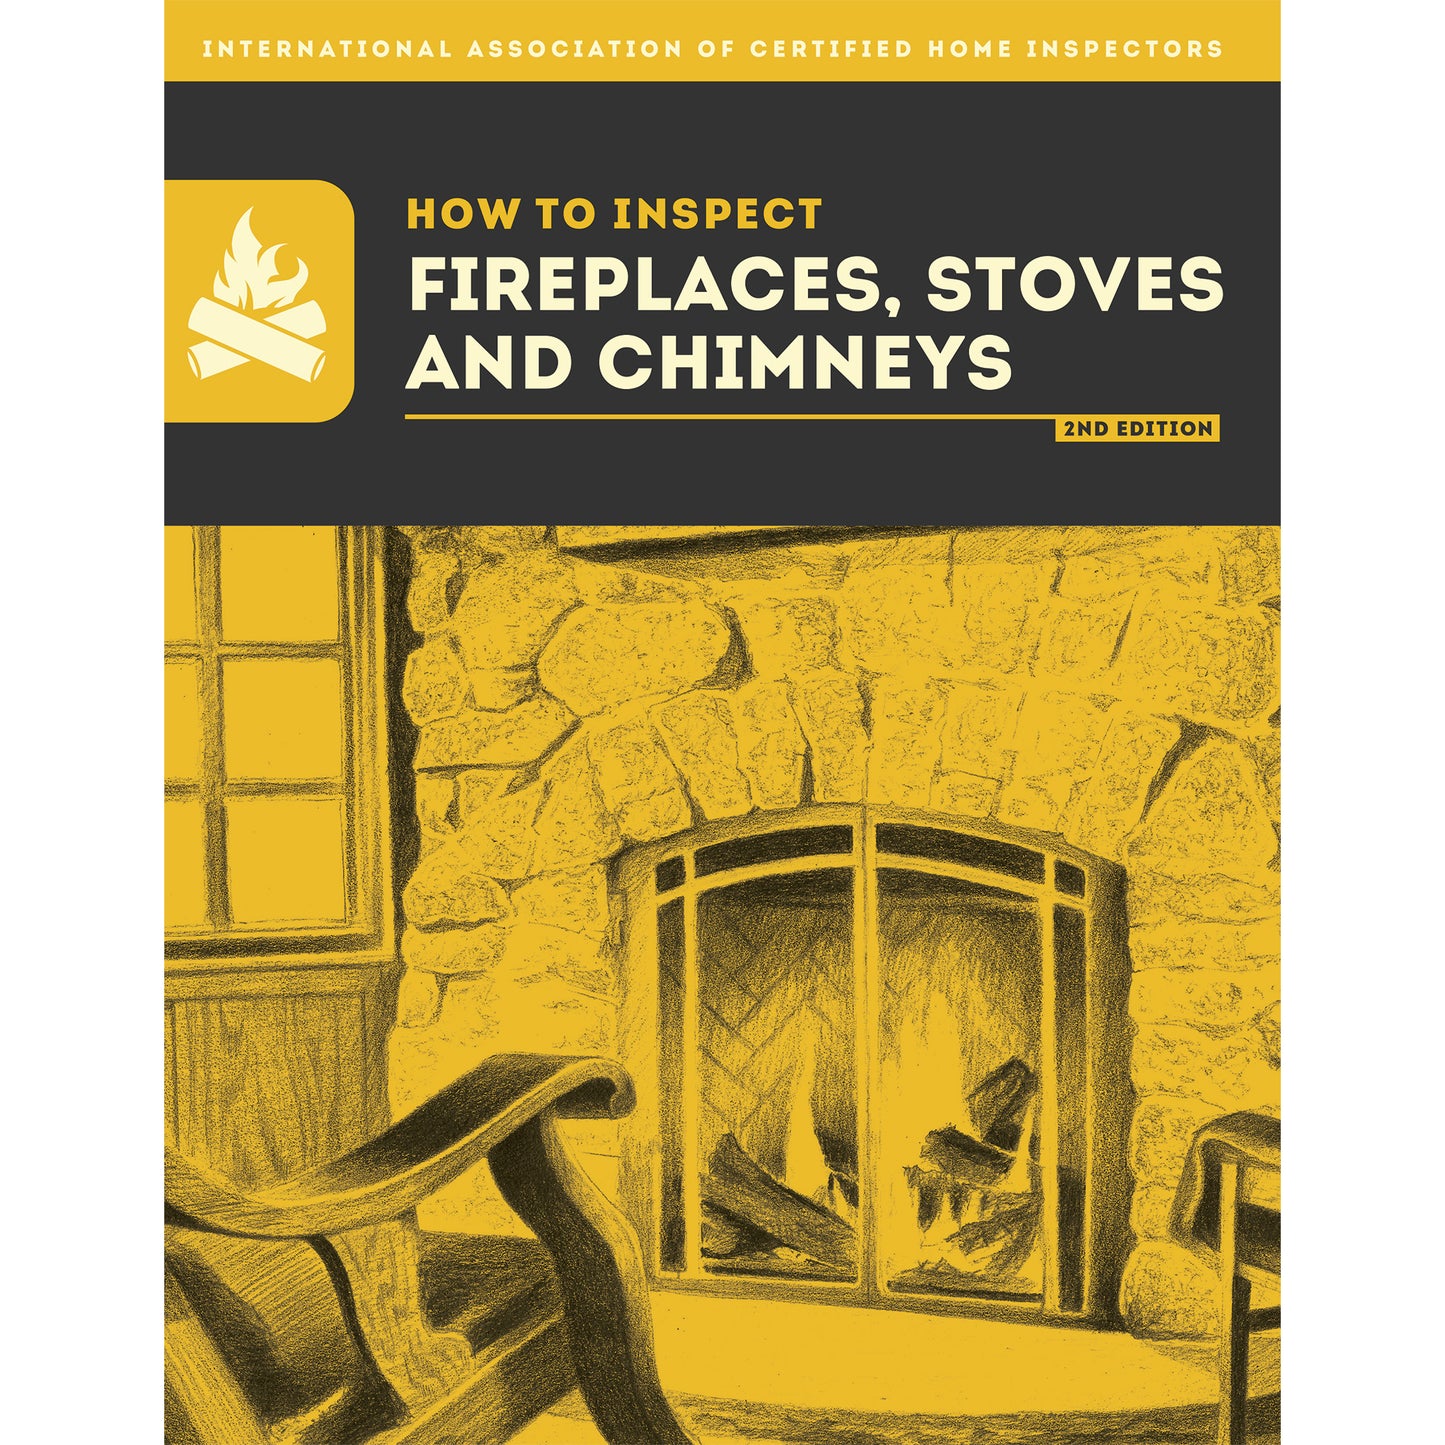 How to Inspect Fireplaces, Stoves and Chimneys PDF Download